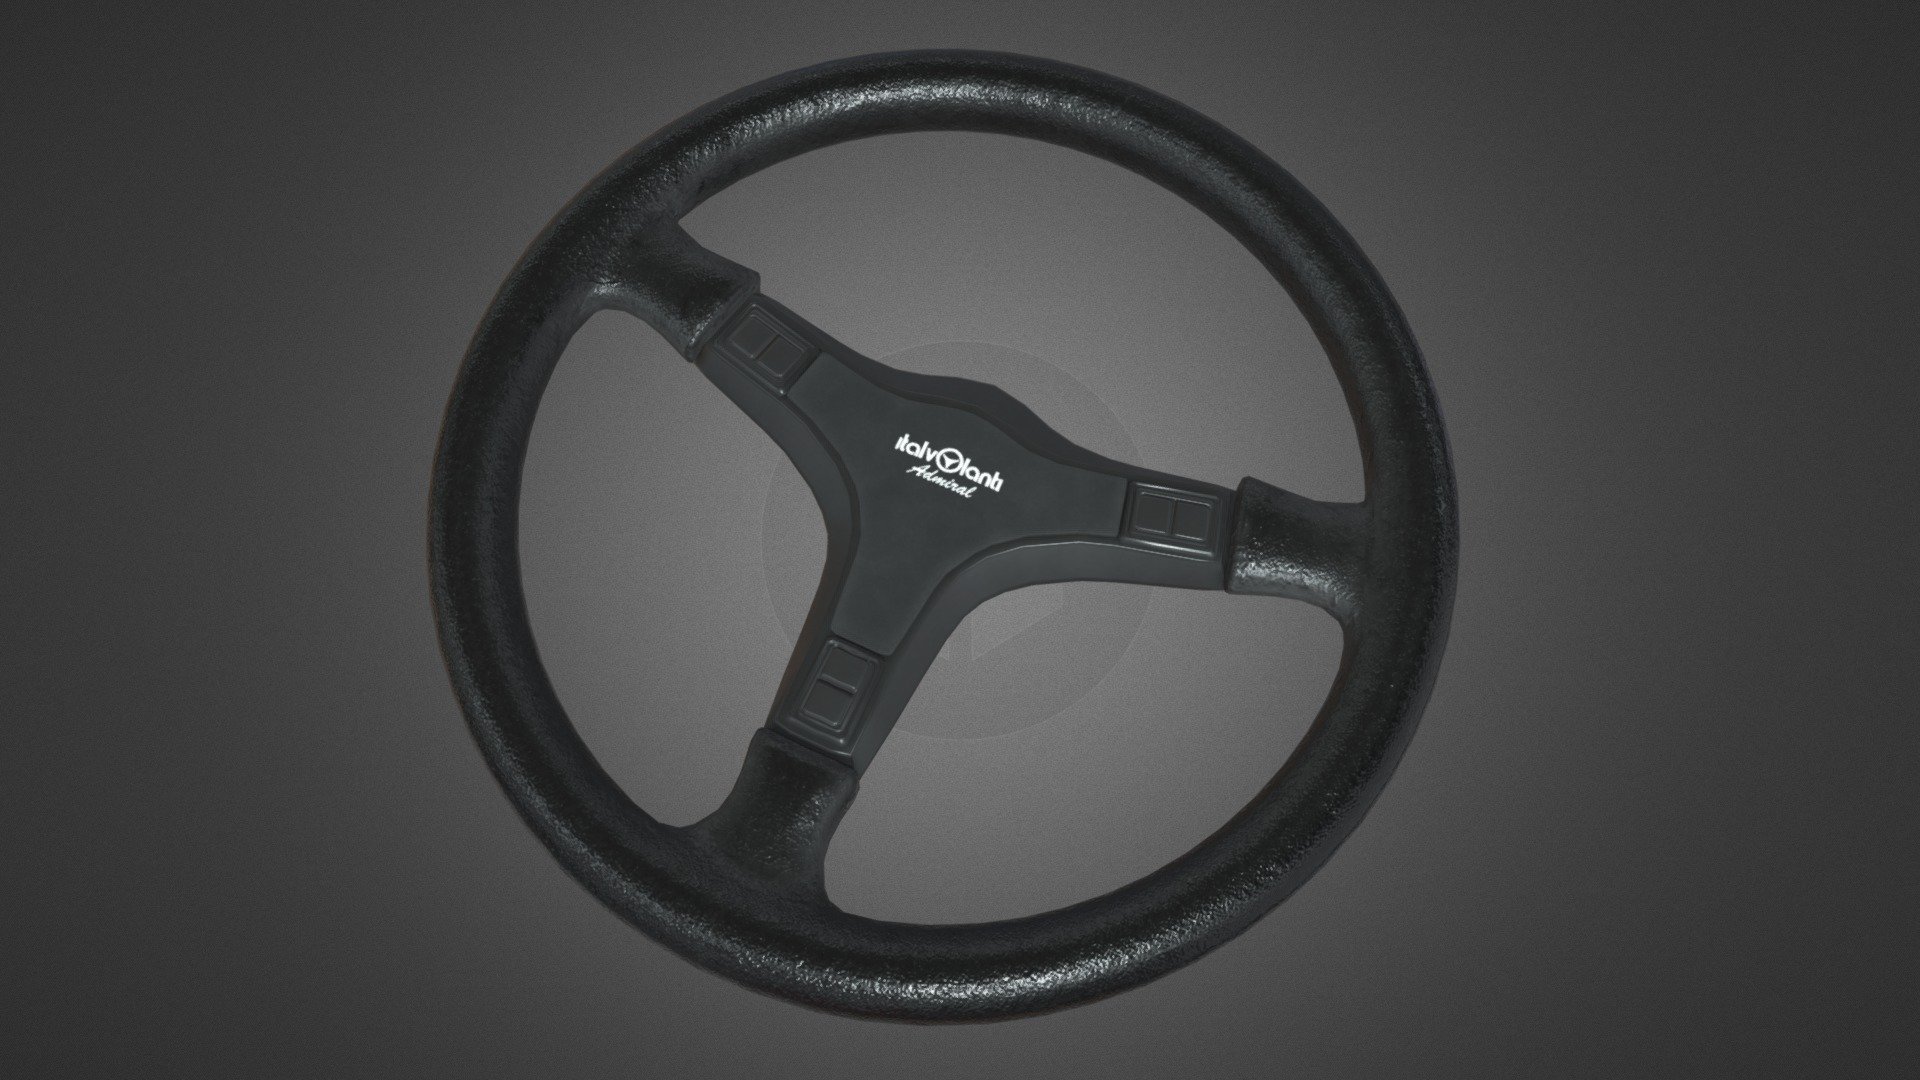 A black colored version of the Italvolanti Admiral steering wheel.

I made this long ago for a mod for Assetto Corsa. Thought about posting it here since it'd be good publicity. Yes, this post does serve as a breaker from my usual streaks of posts.  I can work and am comfortable on stuff other than low poly models and textures. I spent around a good few hours making it, and I was very proud of the final end result.

Would definitely try again when I start modding higher end video games 3d model